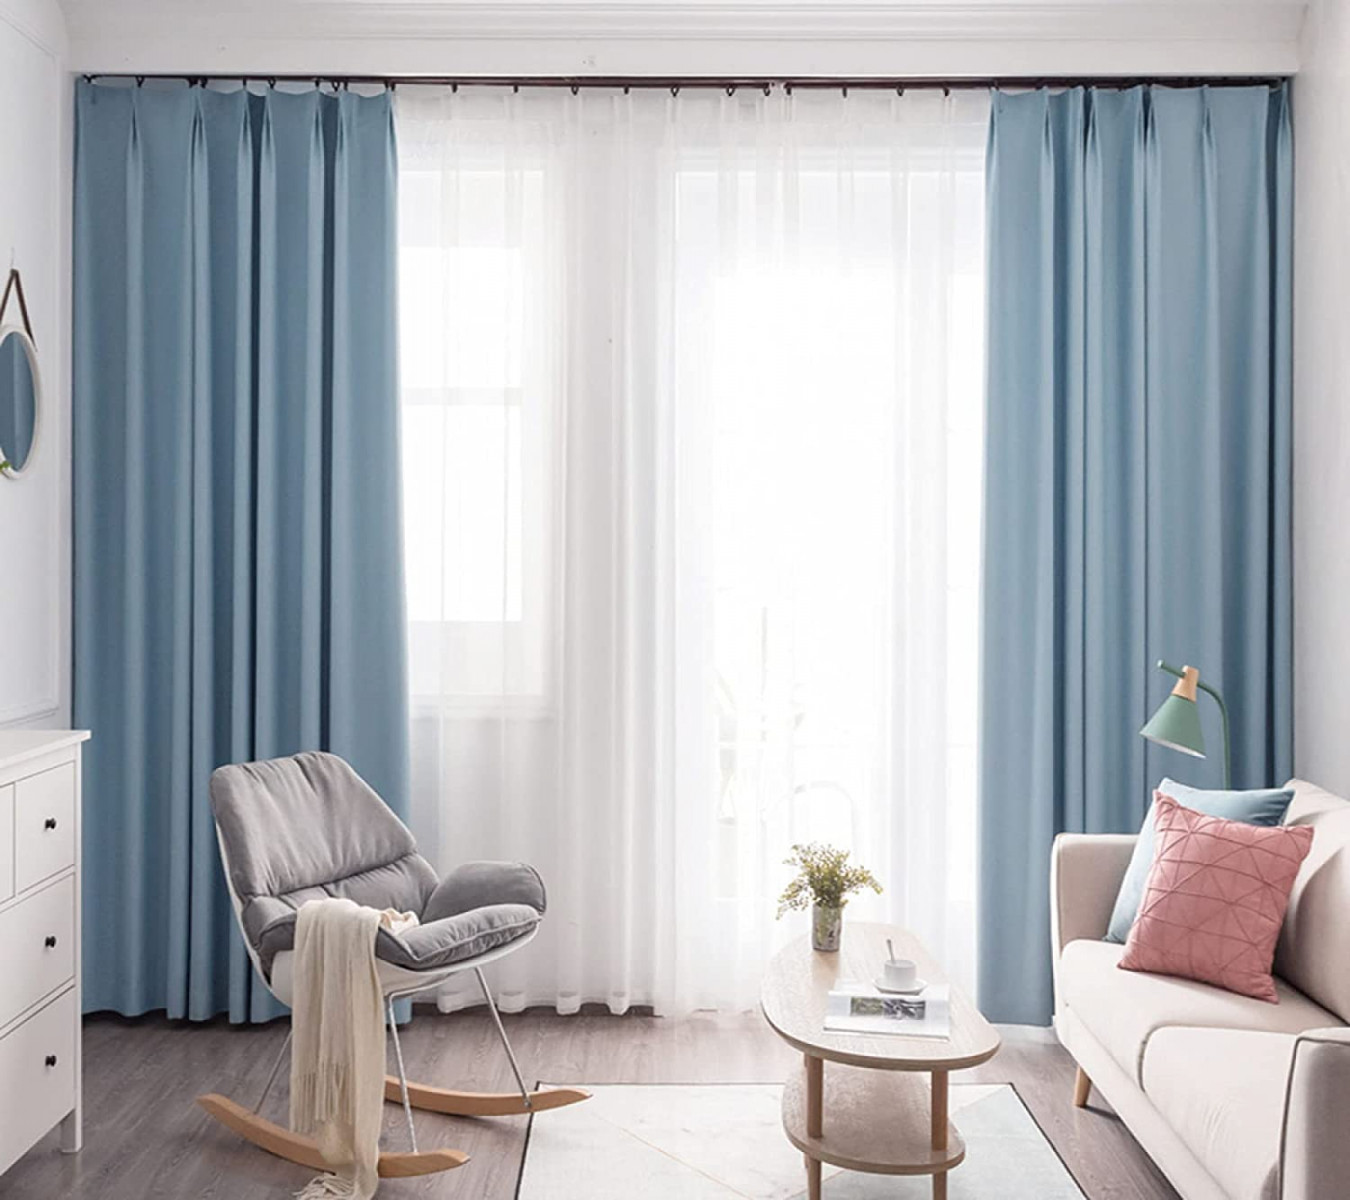 ZQJKL Full Blackout Curtains for Living Room, Heat Insulated